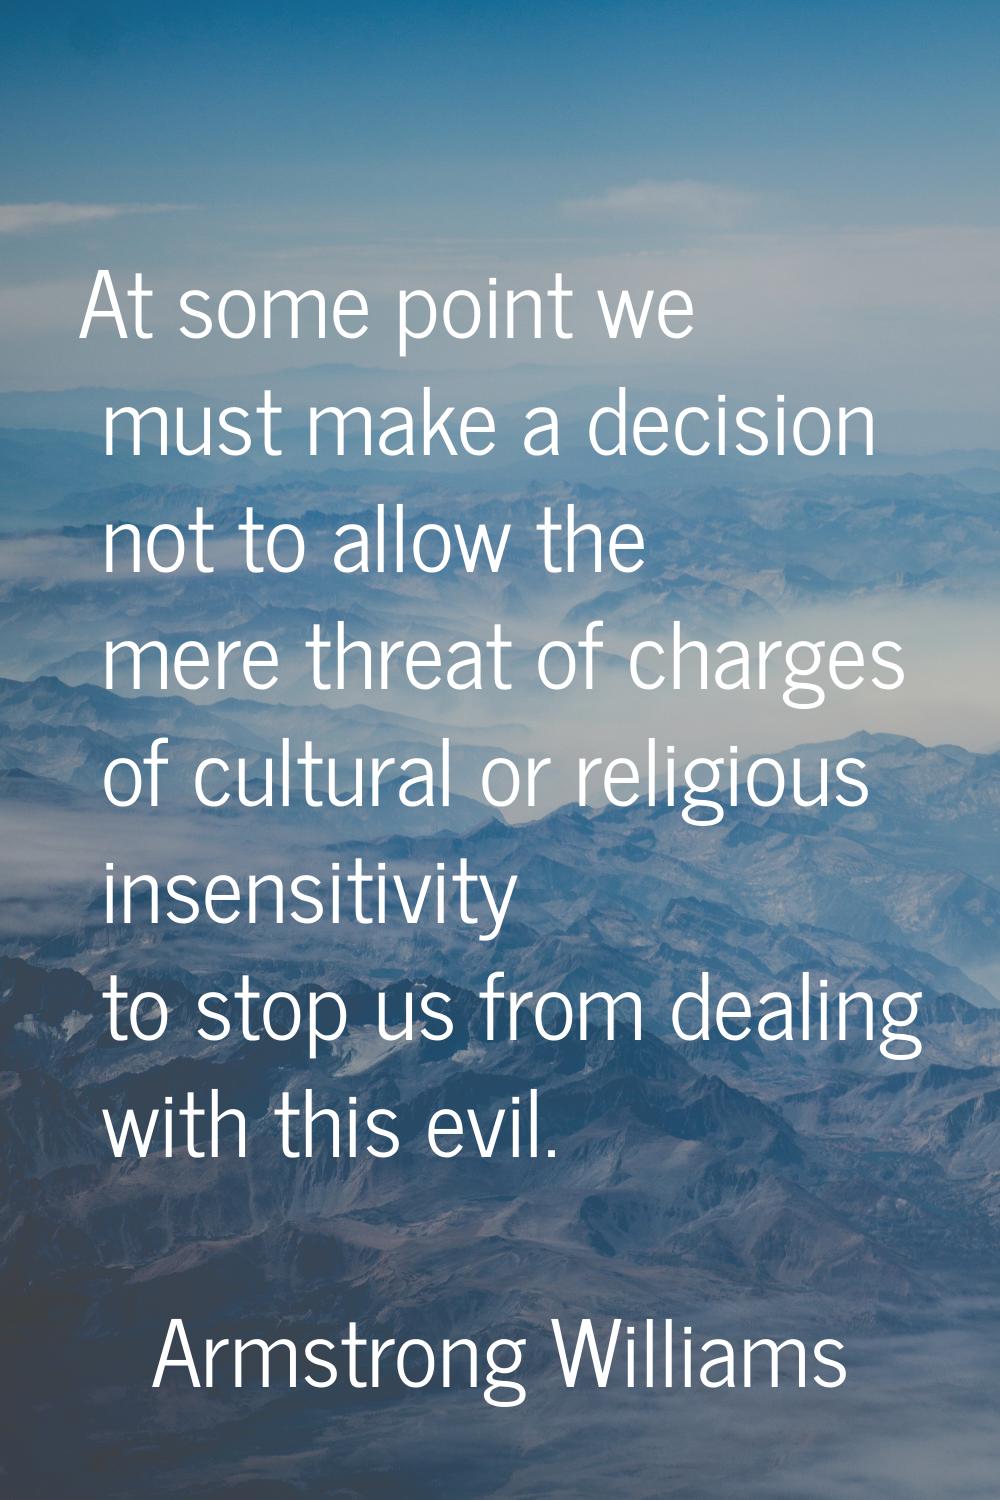 At some point we must make a decision not to allow the mere threat of charges of cultural or religi